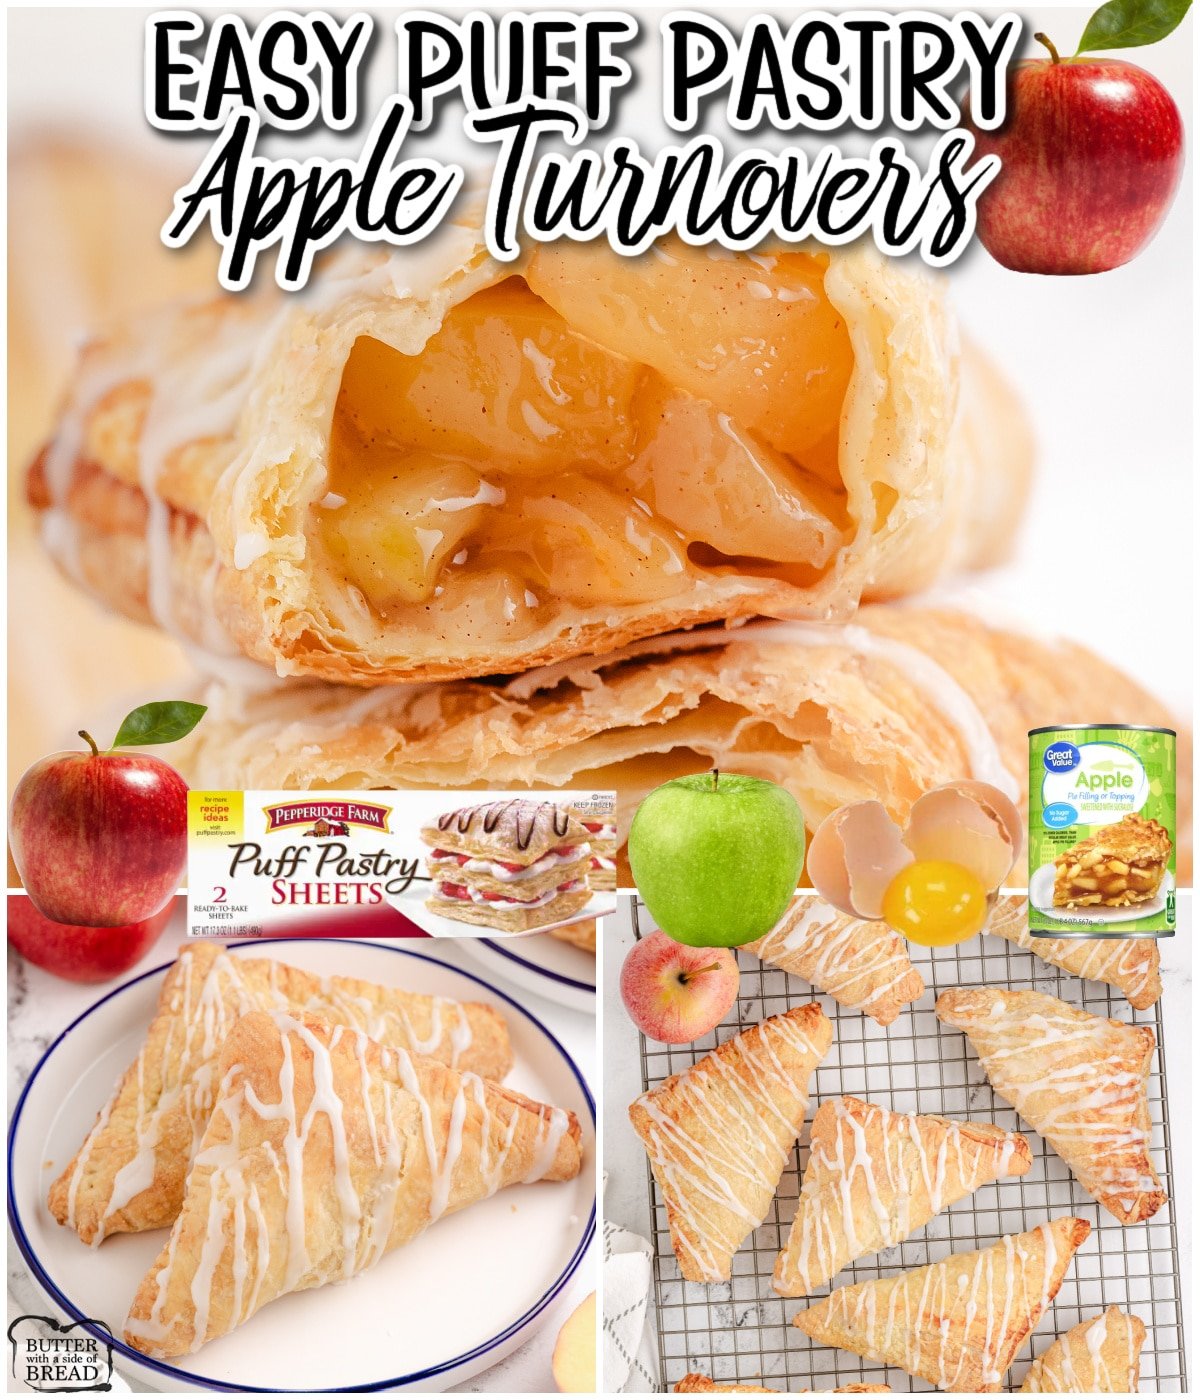 Puff Pastry Apple Turnovers are filled with tangy apple pie filling, baked until golden brown & crispy, then topped with a sweet almond icing! This apple puff pastries are easy to make & delicious!